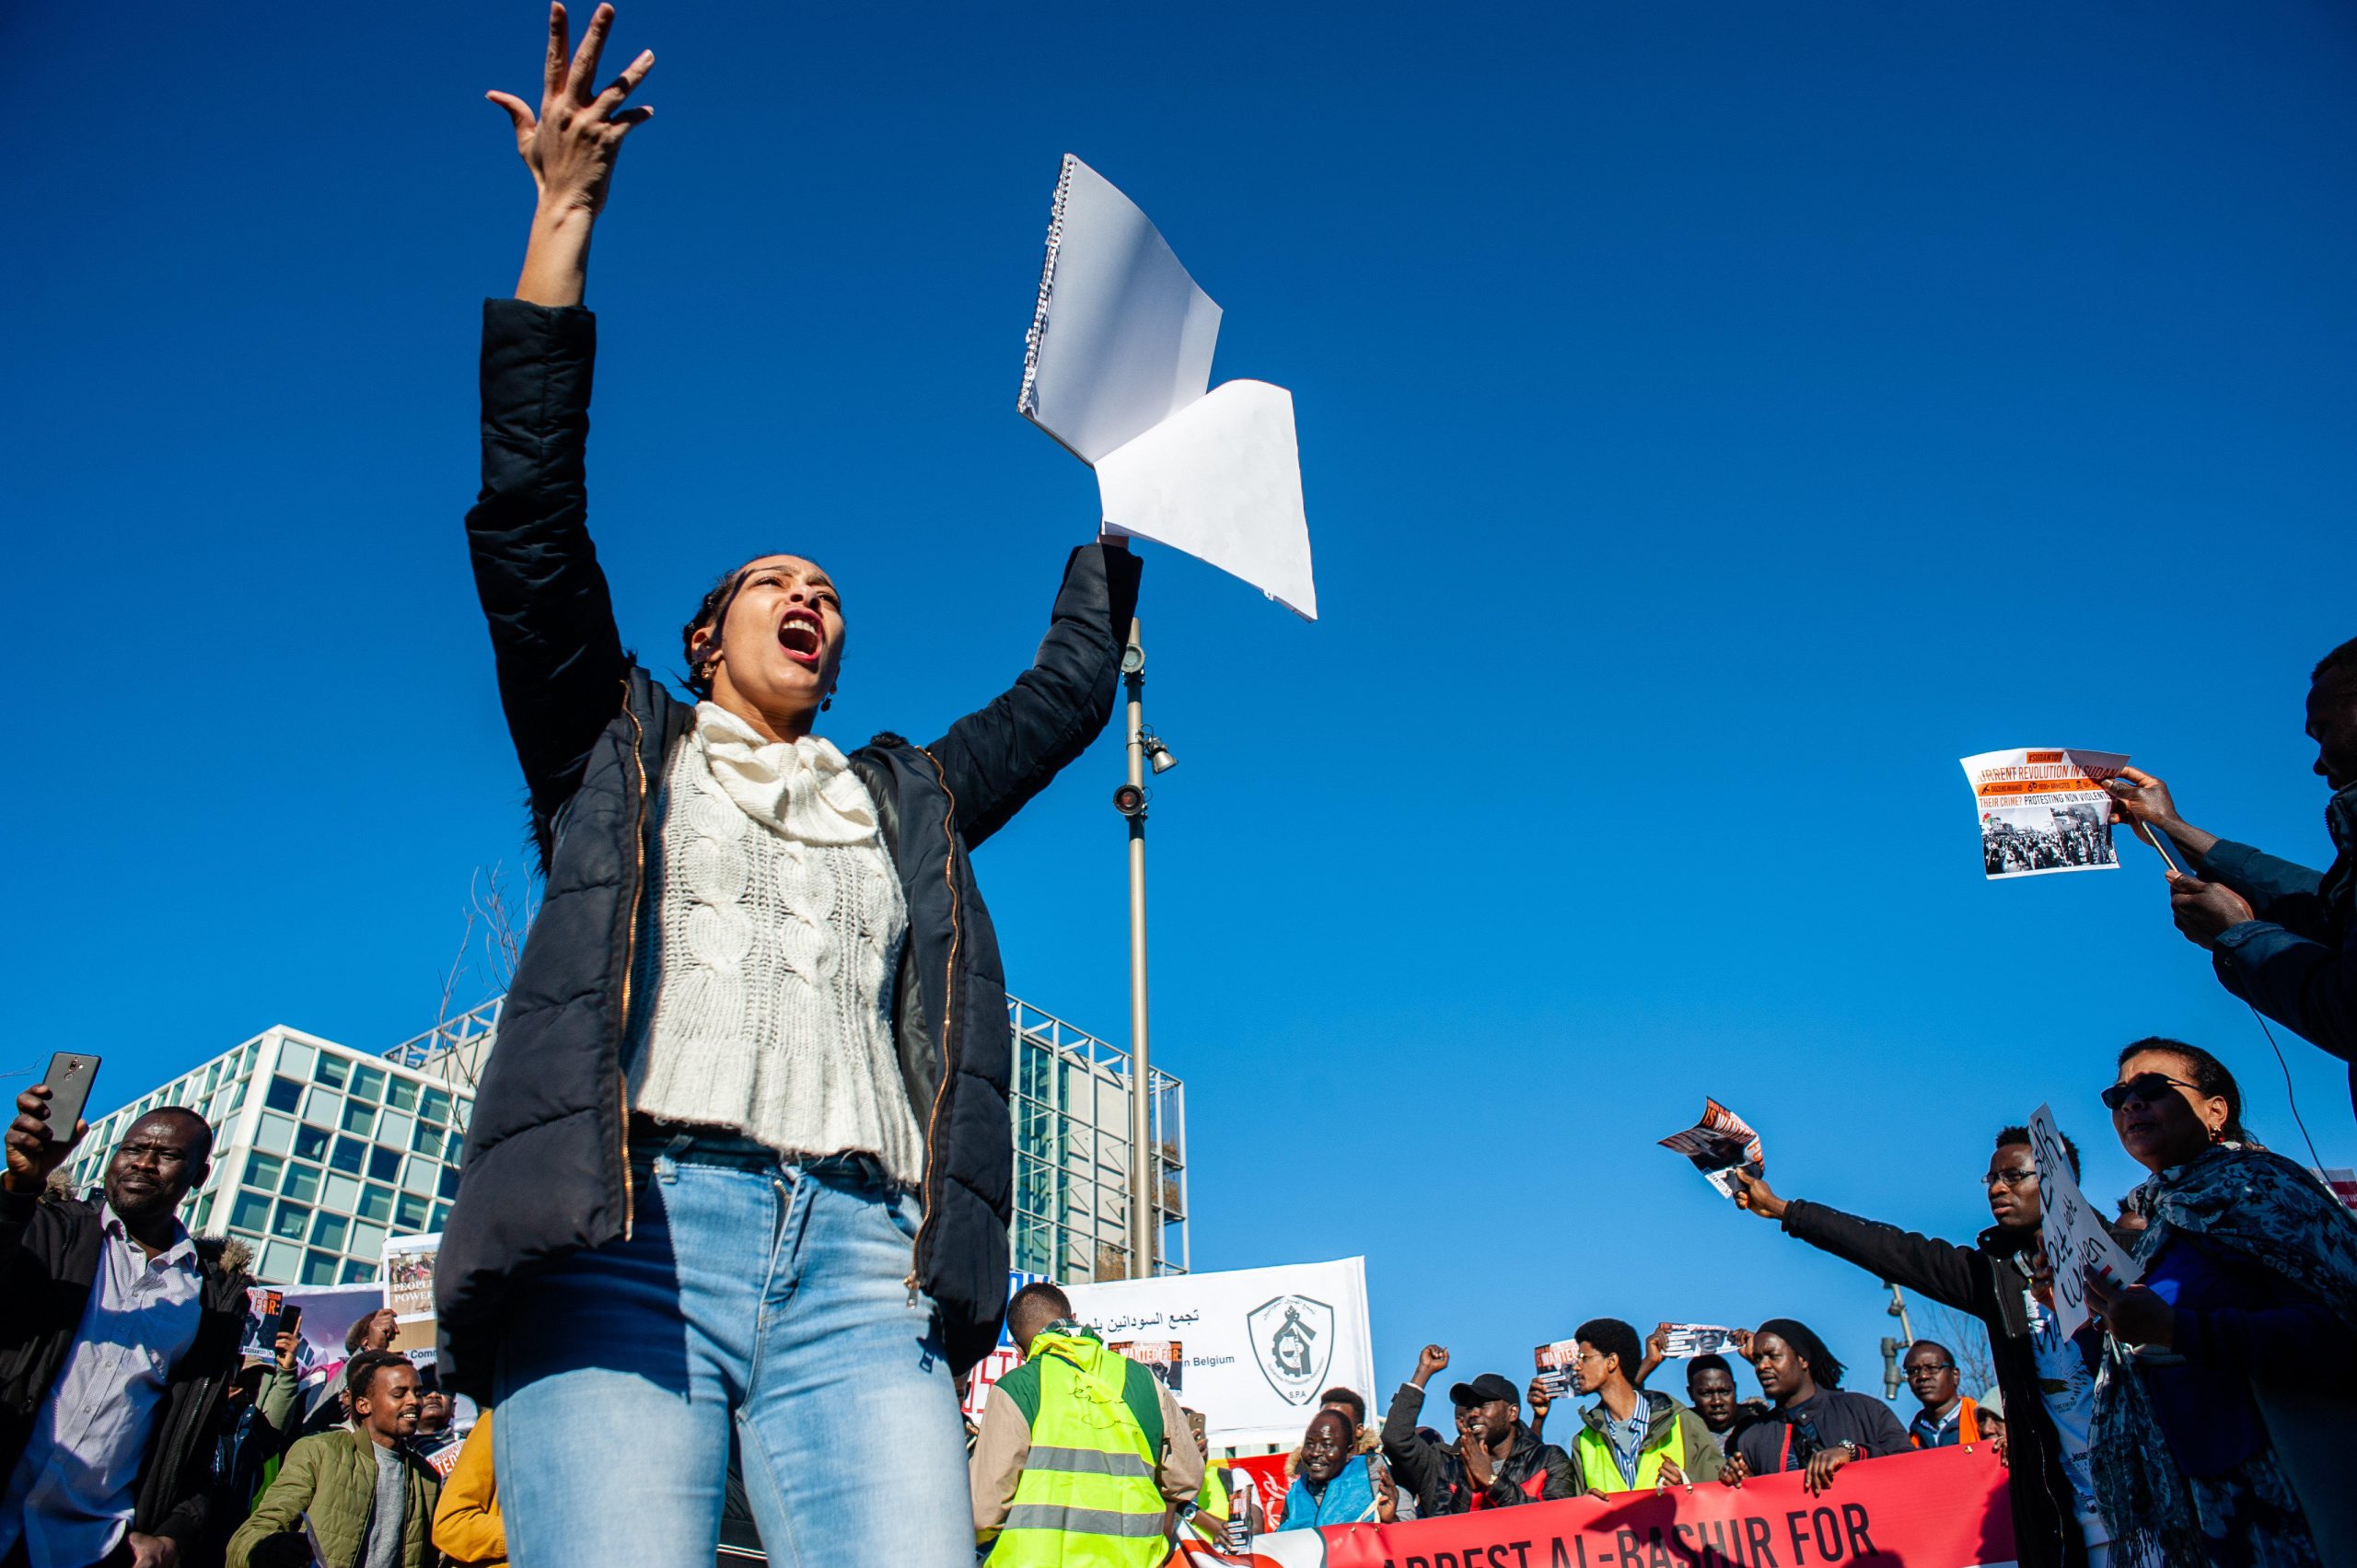 Protestors chanting during a demonstration outside the International Criminal Court in the Hague in solidarity with the revolution in Sudan, 15 February 2019. Source: ZUMA Press/ Alamy via Reuters.